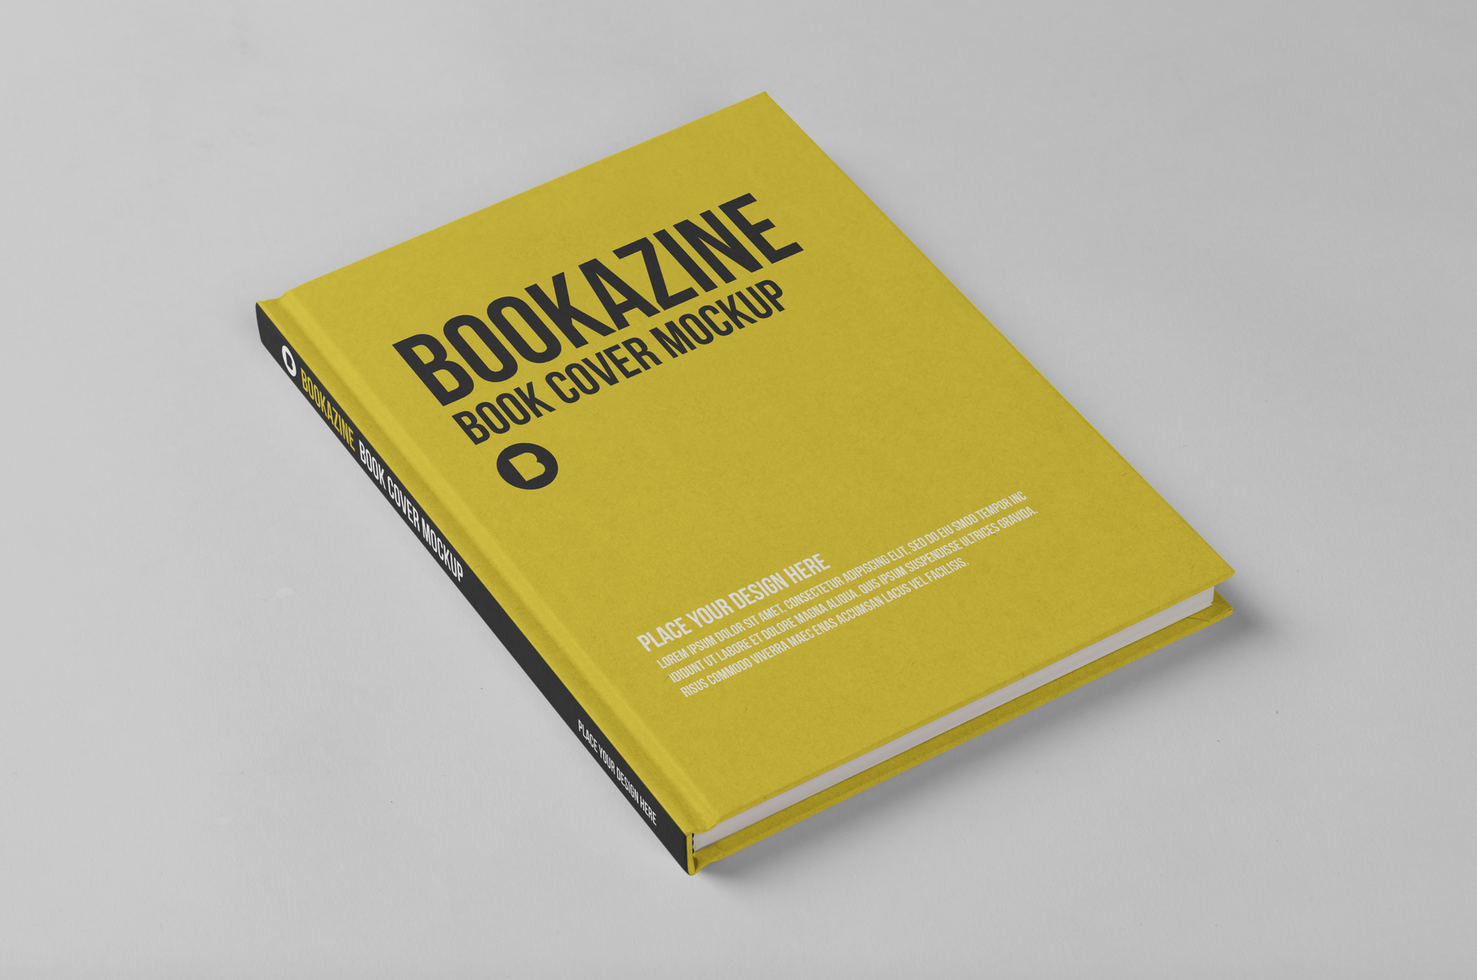 Hard book cover mockup template psd